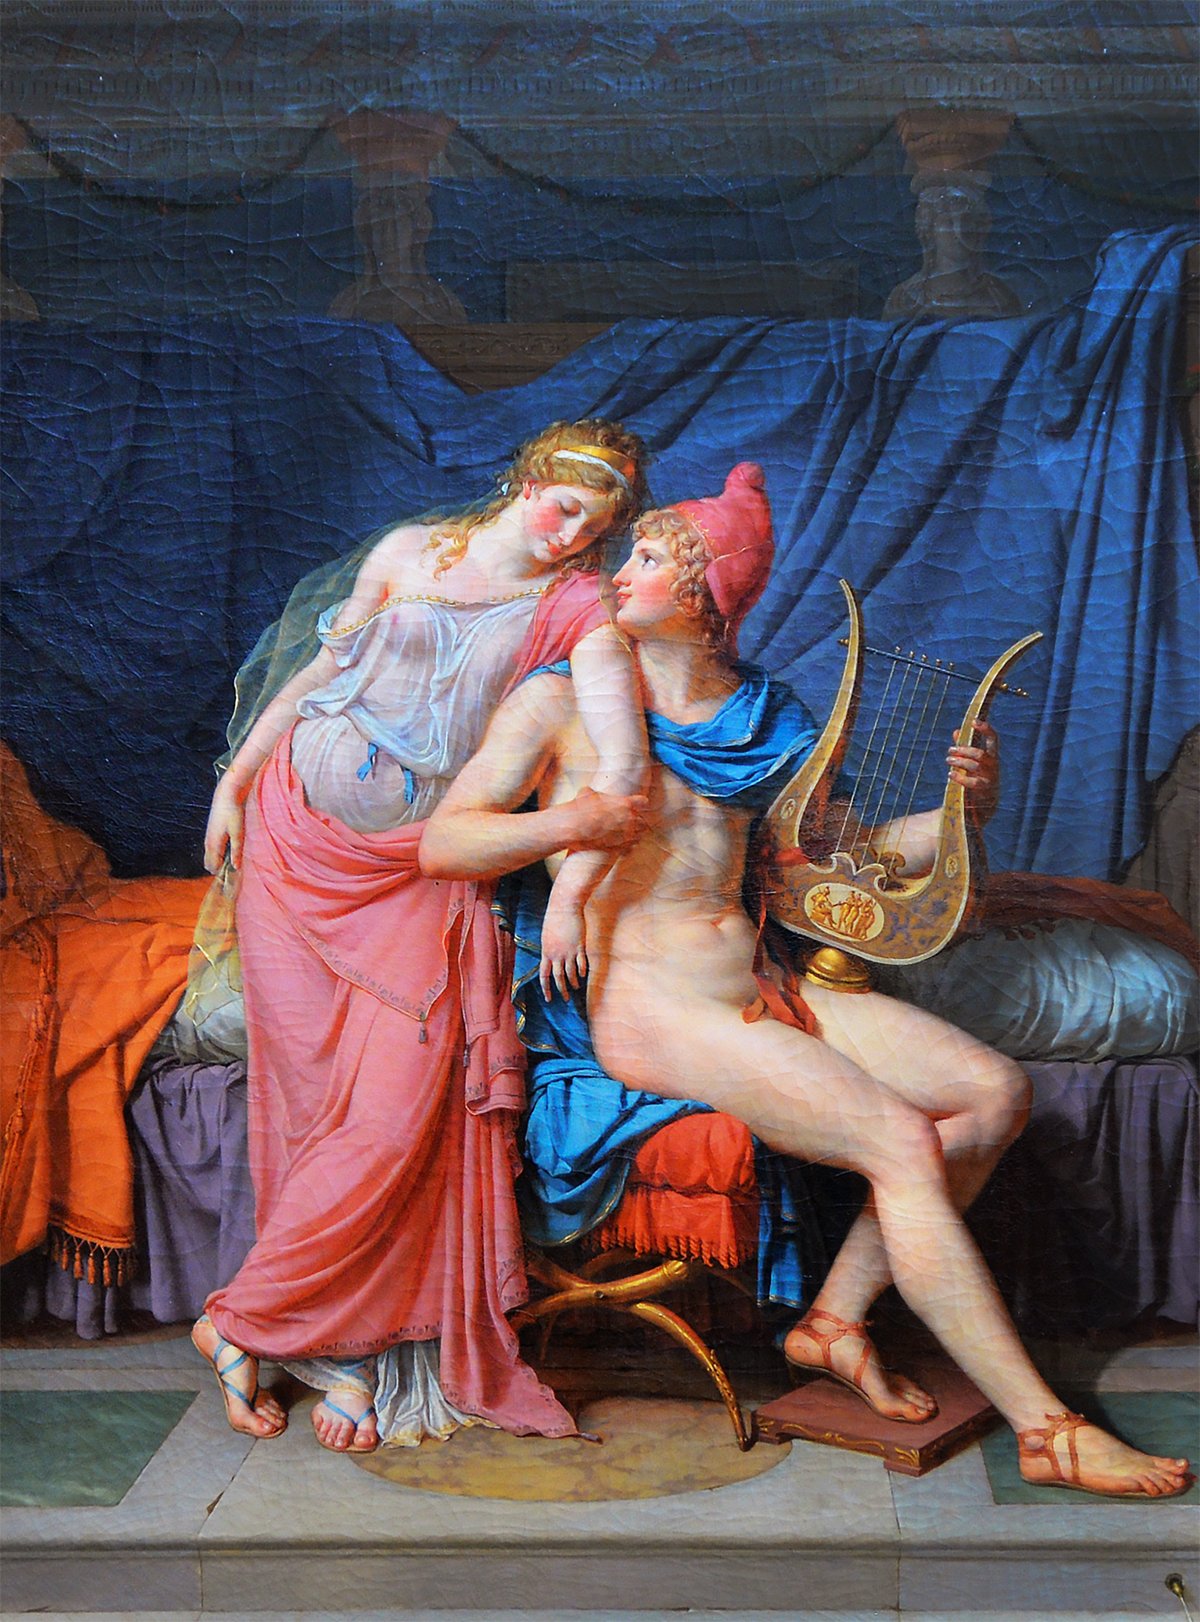 Painting "The Loves of Paris and Helen" depicting Paris, seated with a lyre, and Helen, standing close, in a romantic embrace with richly colored drapery in the background, symbolizing their legendary love affair from Greek mythology.